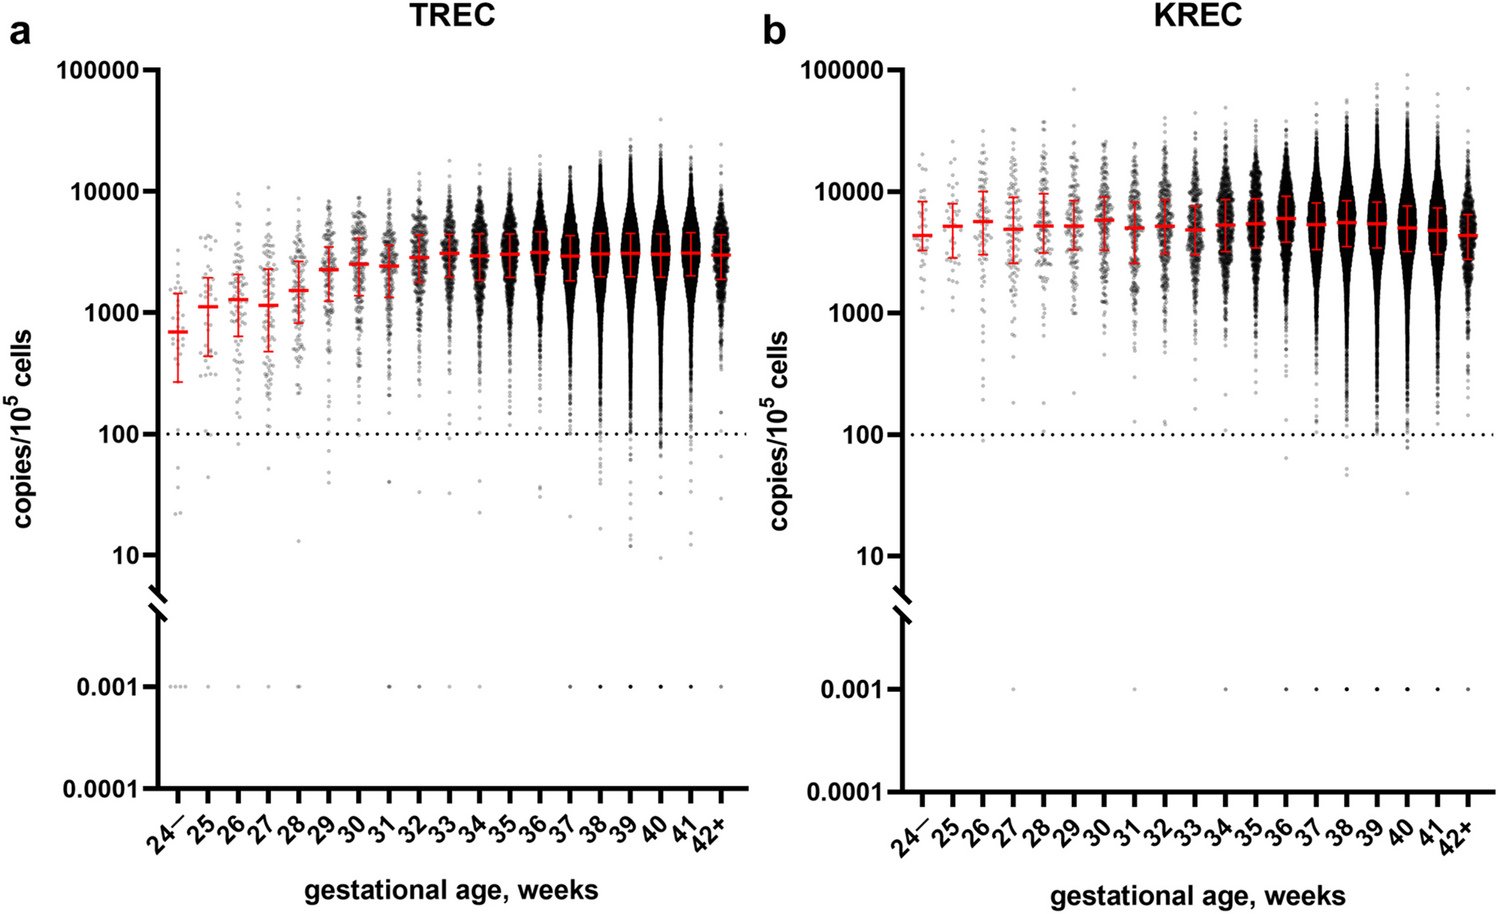 Newborn Screening for Severe T and B Cell Lymphopenia Using TREC/KREC Detection: A Large-Scale Pilot Study of 202,908 Newborns